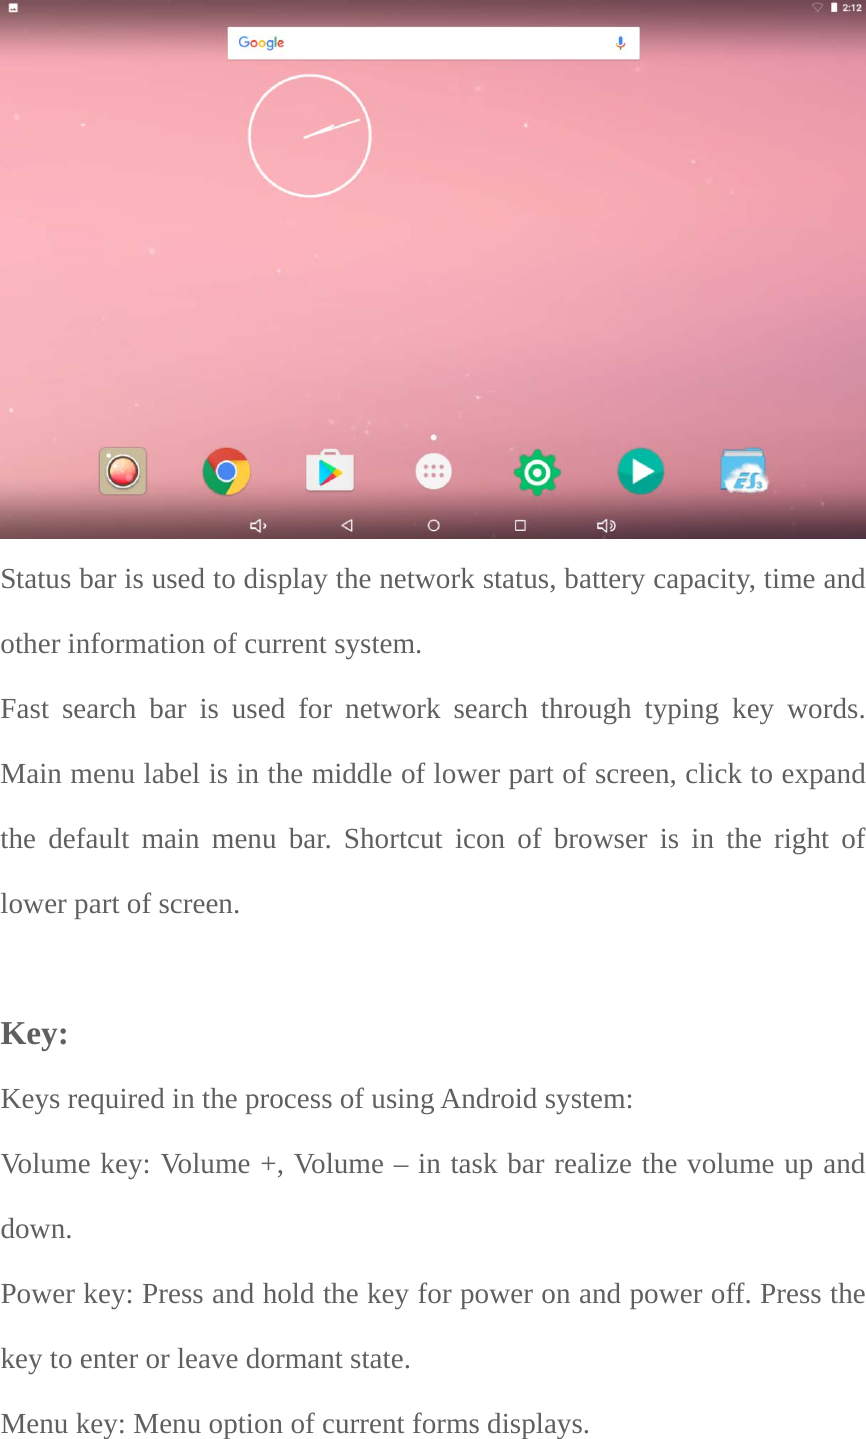  Status bar is used to display the network status, battery capacity, time and other information of current system.     Fast search bar is used for network search through typing key words. Main menu label is in the middle of lower part of screen, click to expand the default main menu bar. Shortcut icon of browser is in the right of lower part of screen.       Key:  Keys required in the process of using Android system:   Volume key: Volume +, Volume – in task bar realize the volume up and down.Power key: Press and hold the key for power on and power off. Press the key to enter or leave dormant state.   Menu key: Menu option of current forms displays.   